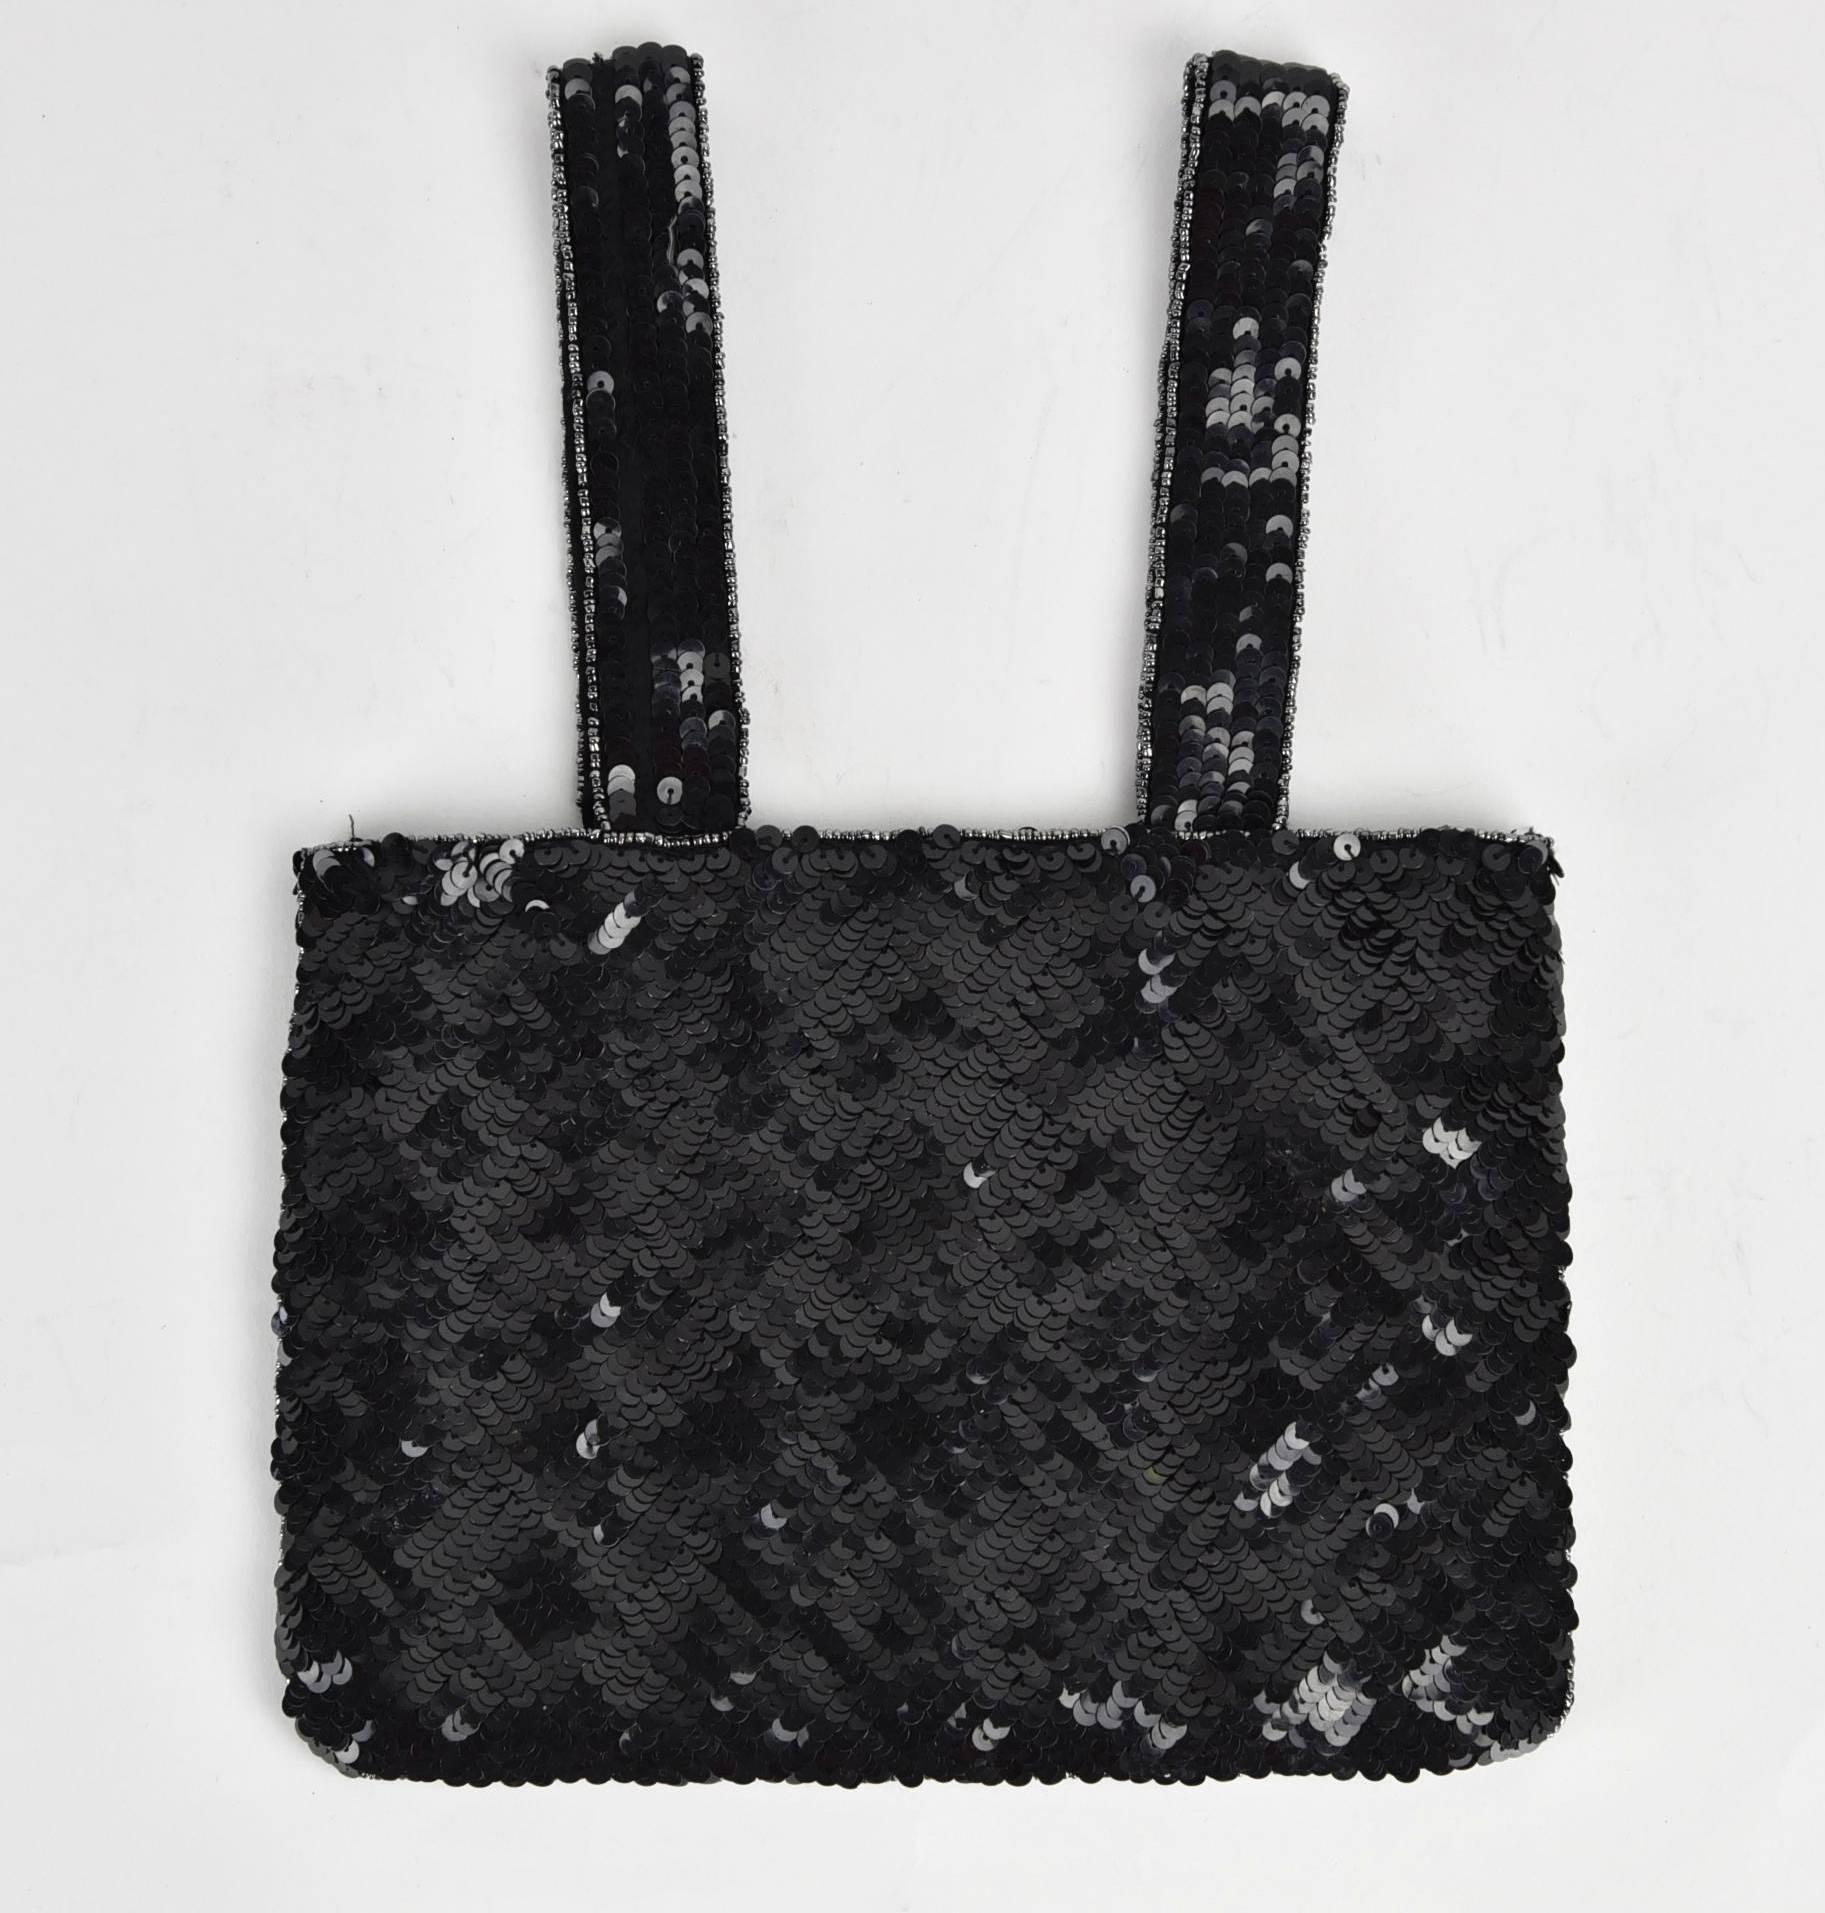 This is a Chanel evening arm bag that is a dressy version of the classic Chanel handbag, but executed in closely sewn black sequins, outlined with silver beads and finished with a rhinestone CC. It measures 9" Wide, 6.5" Height and with